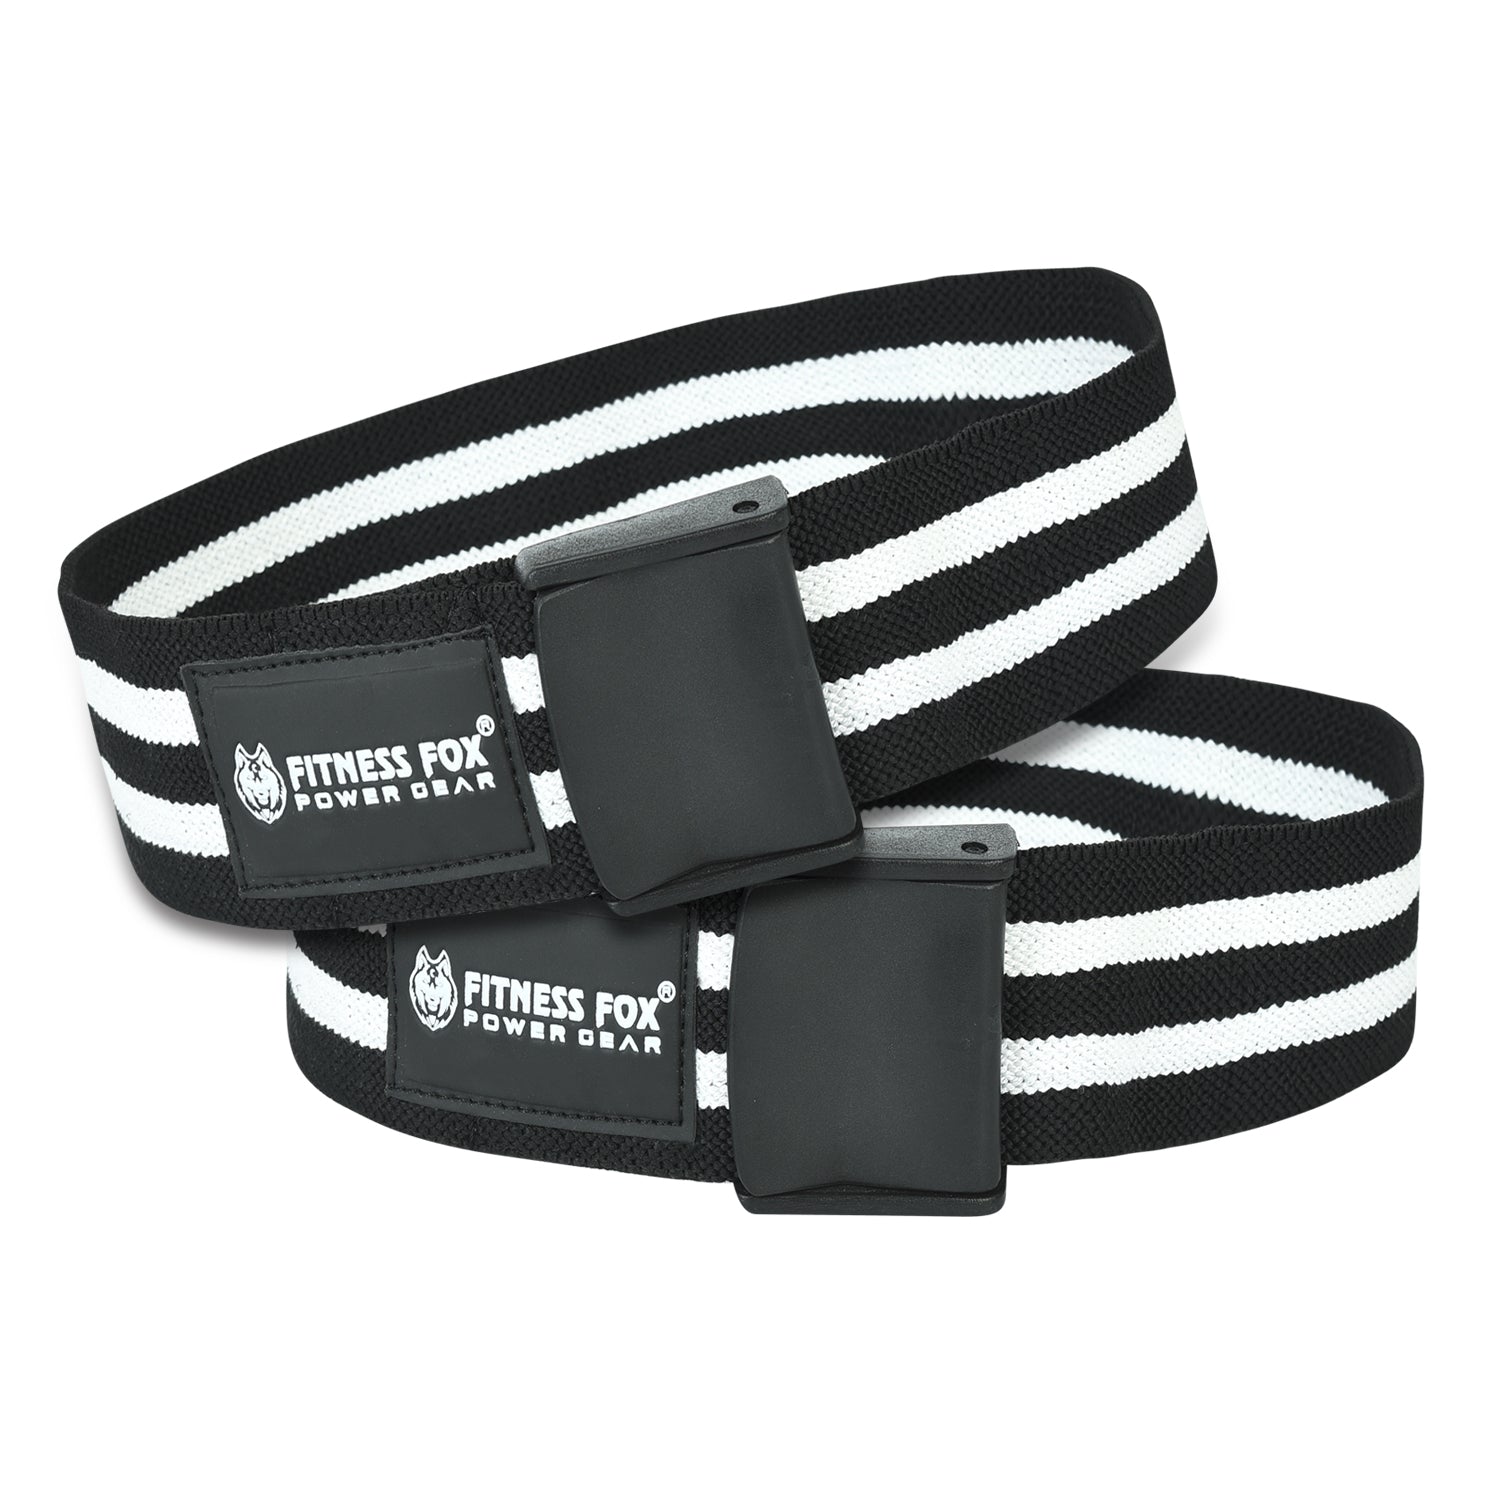 FITNESS FOX Weightlifting Blood Flow Restriction BFR Bands for Biceps